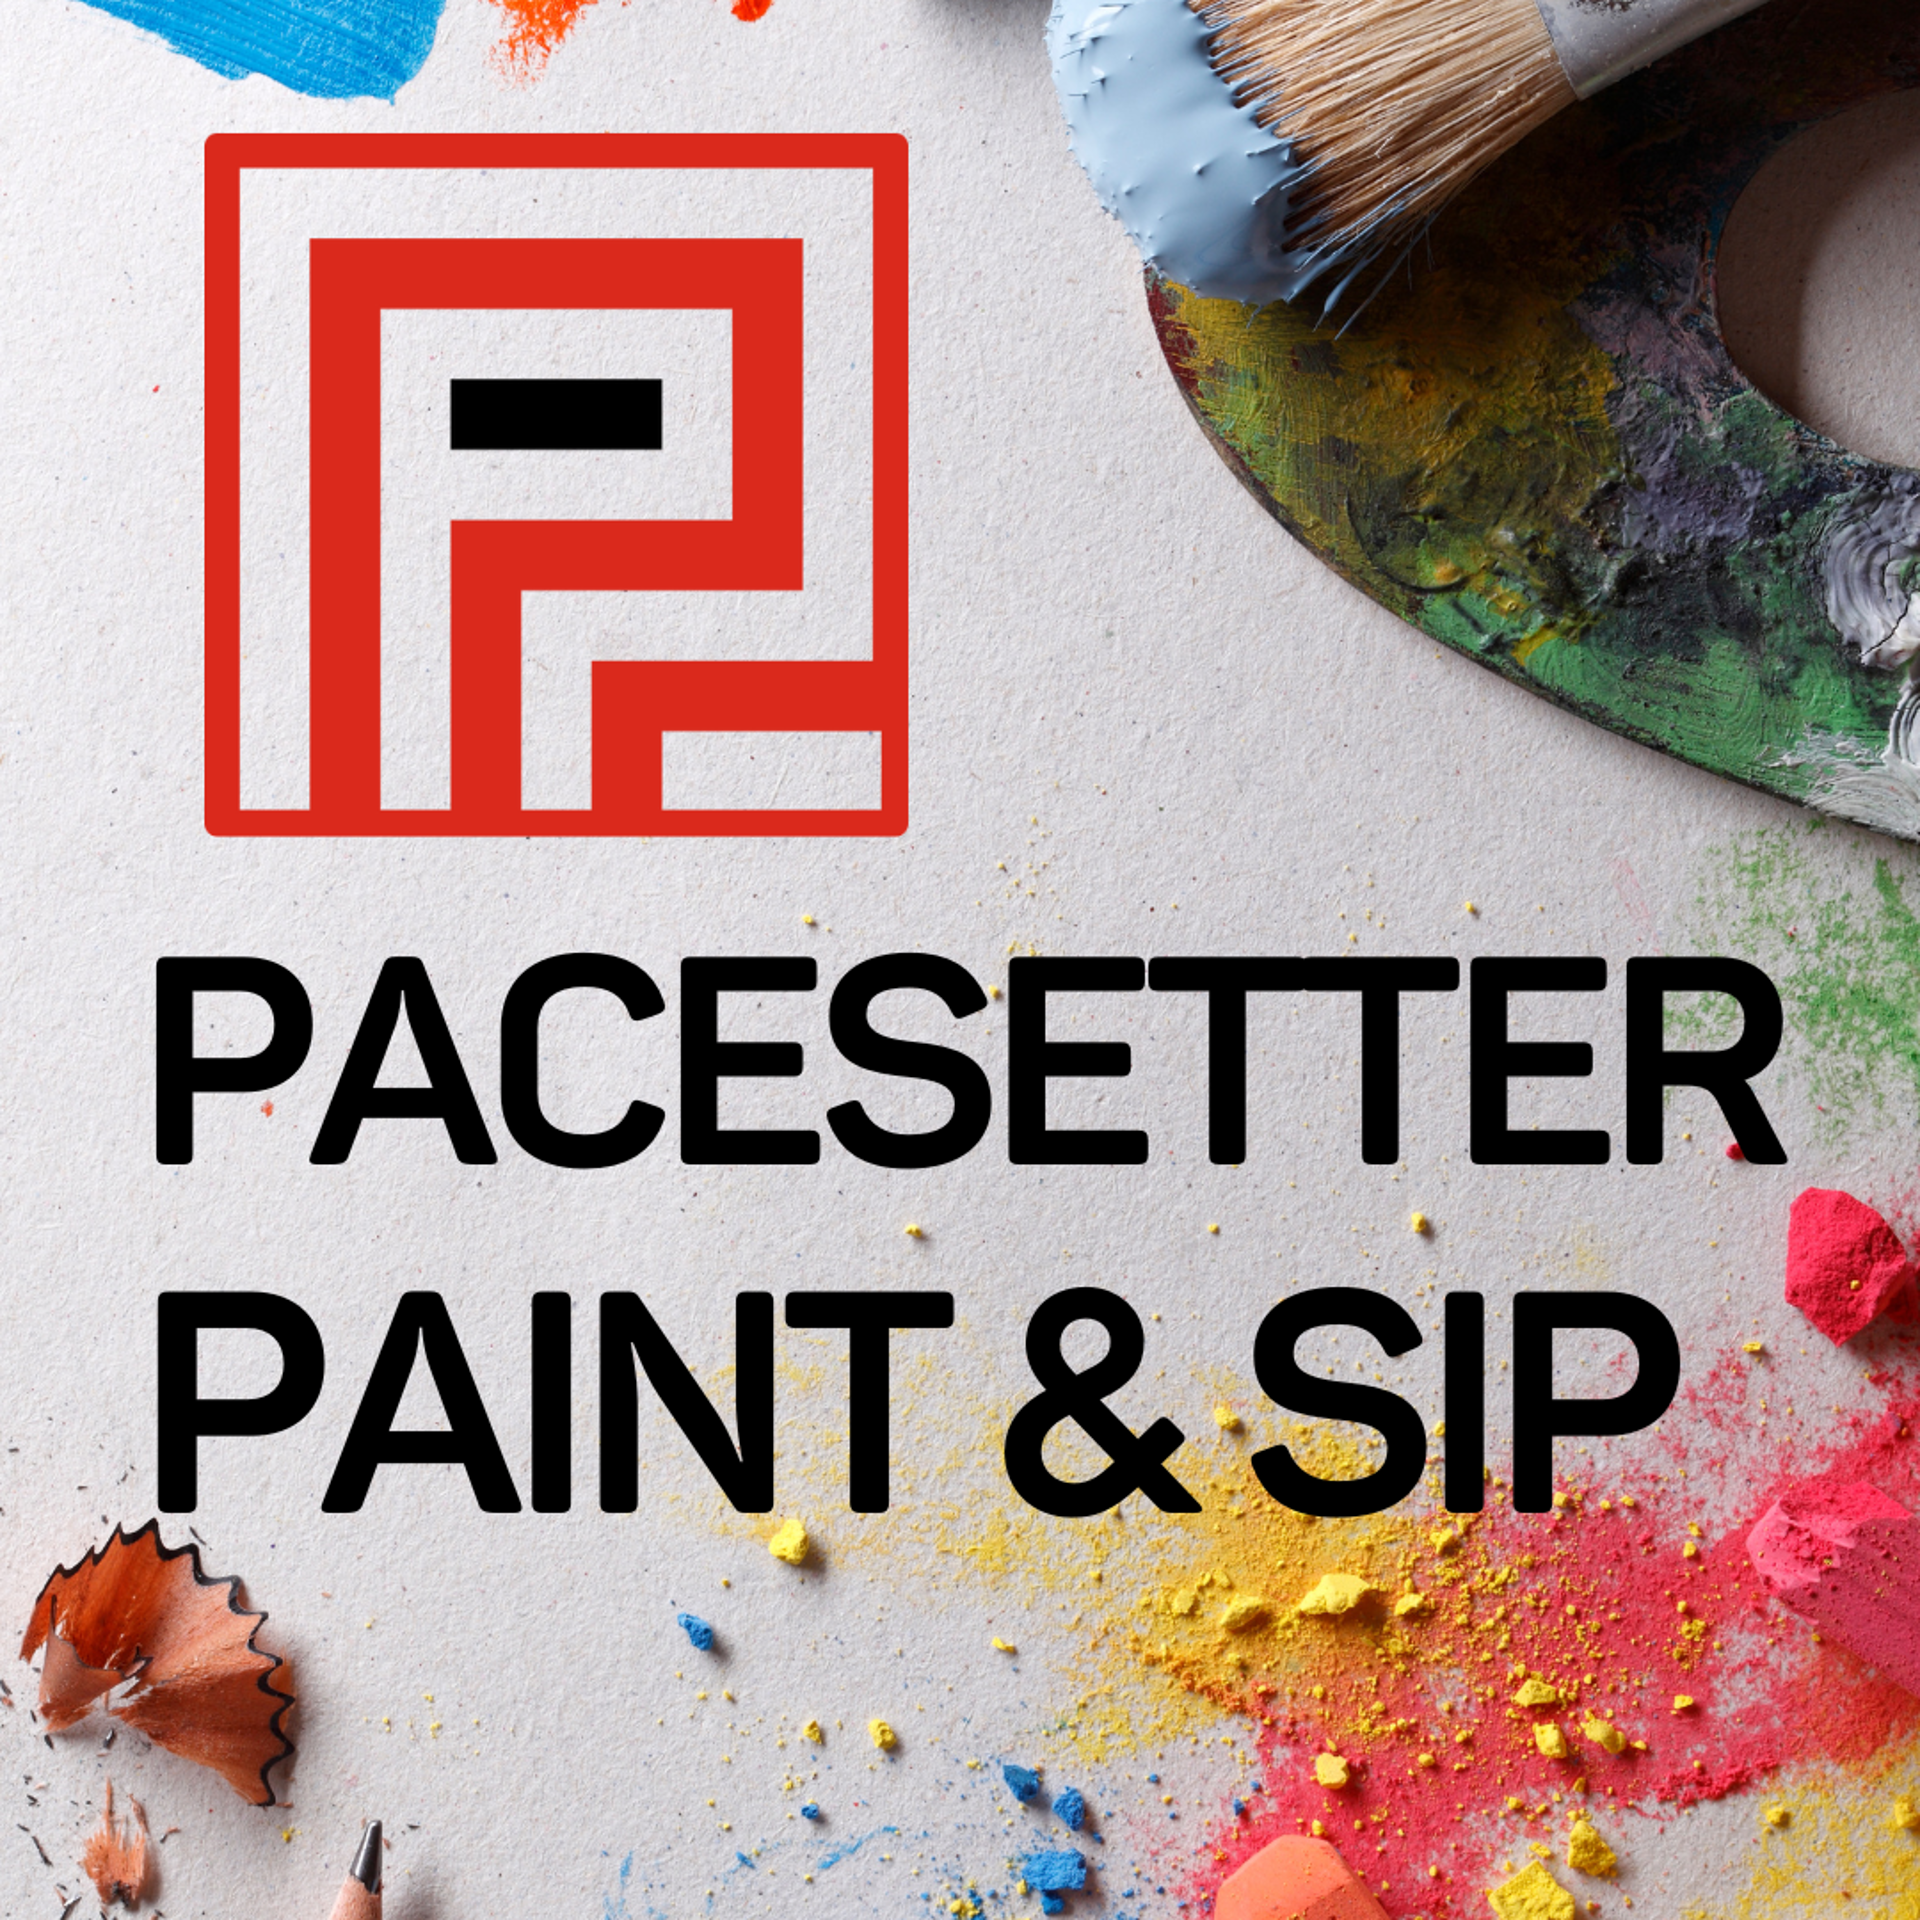 Paint & Sip October 27, 6-8pm